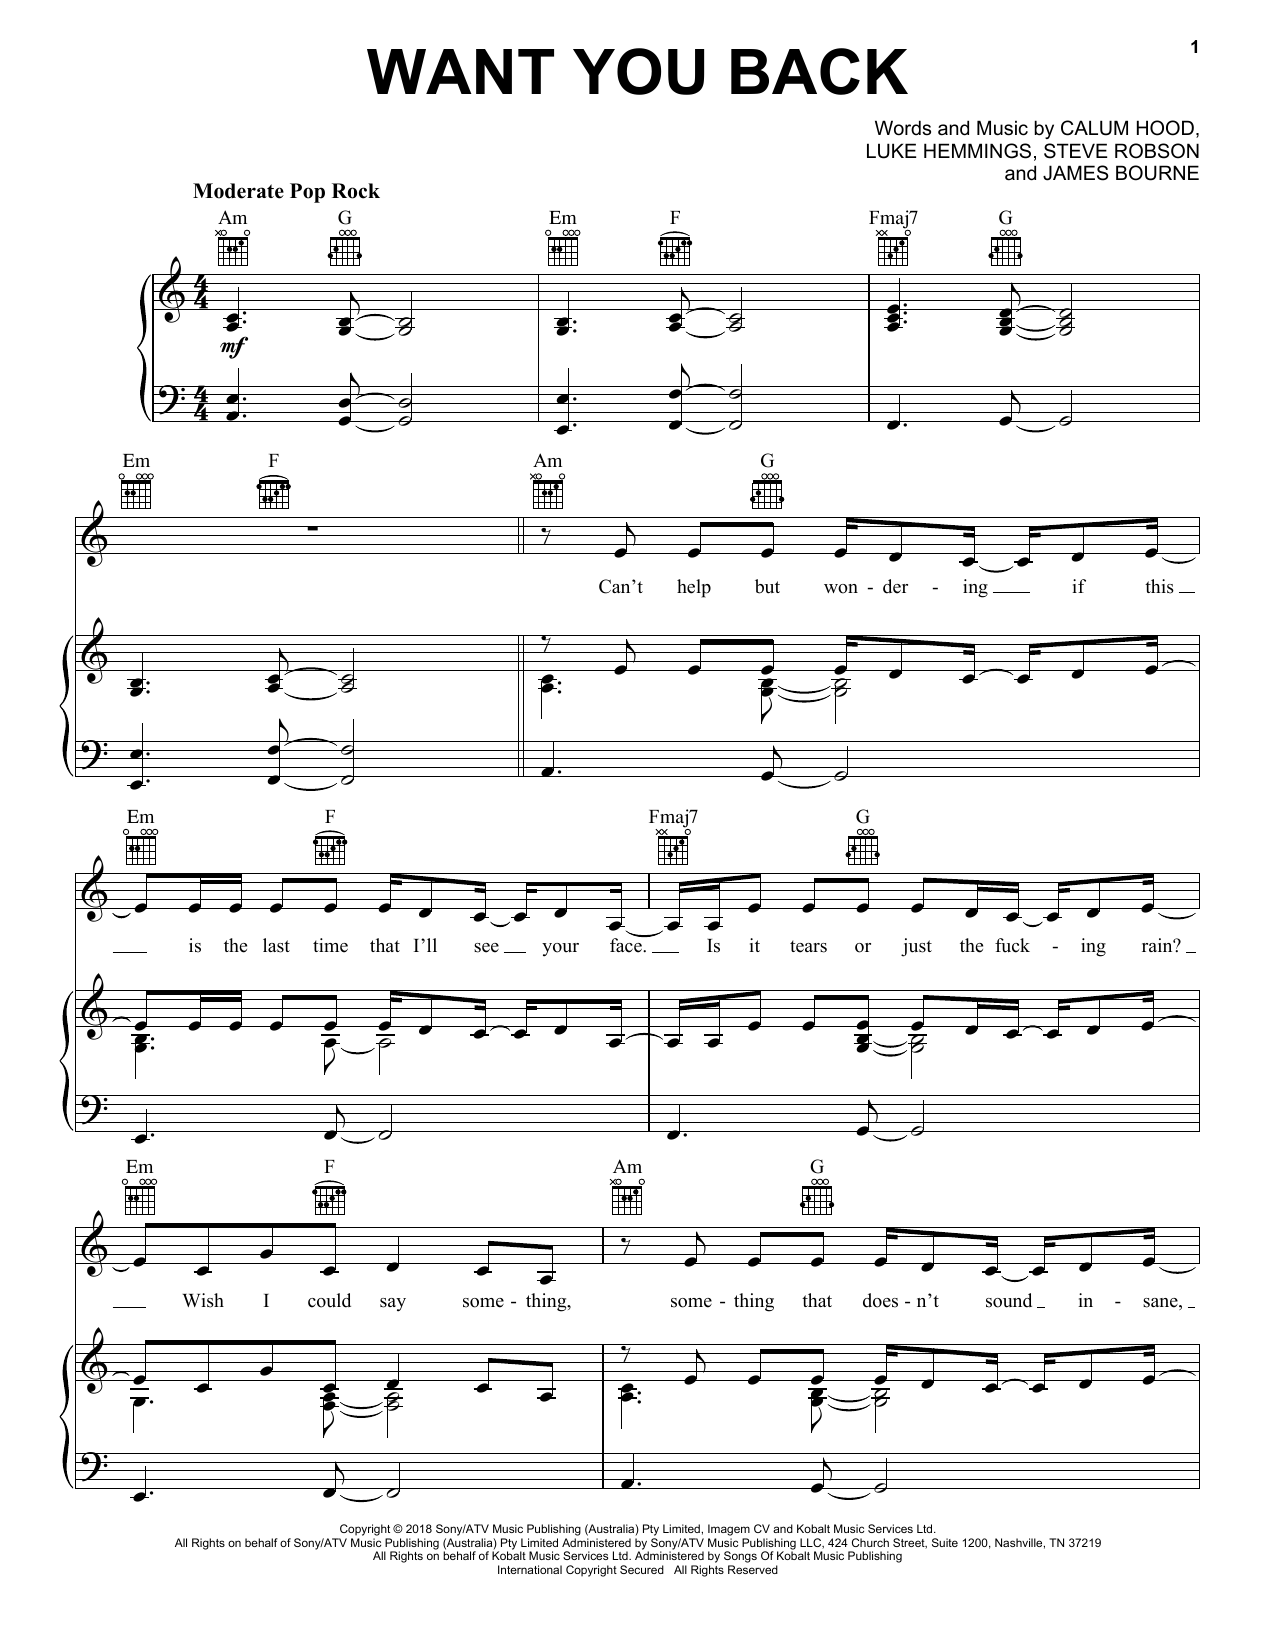 Download 5 Seconds of Summer Want You Back Sheet Music